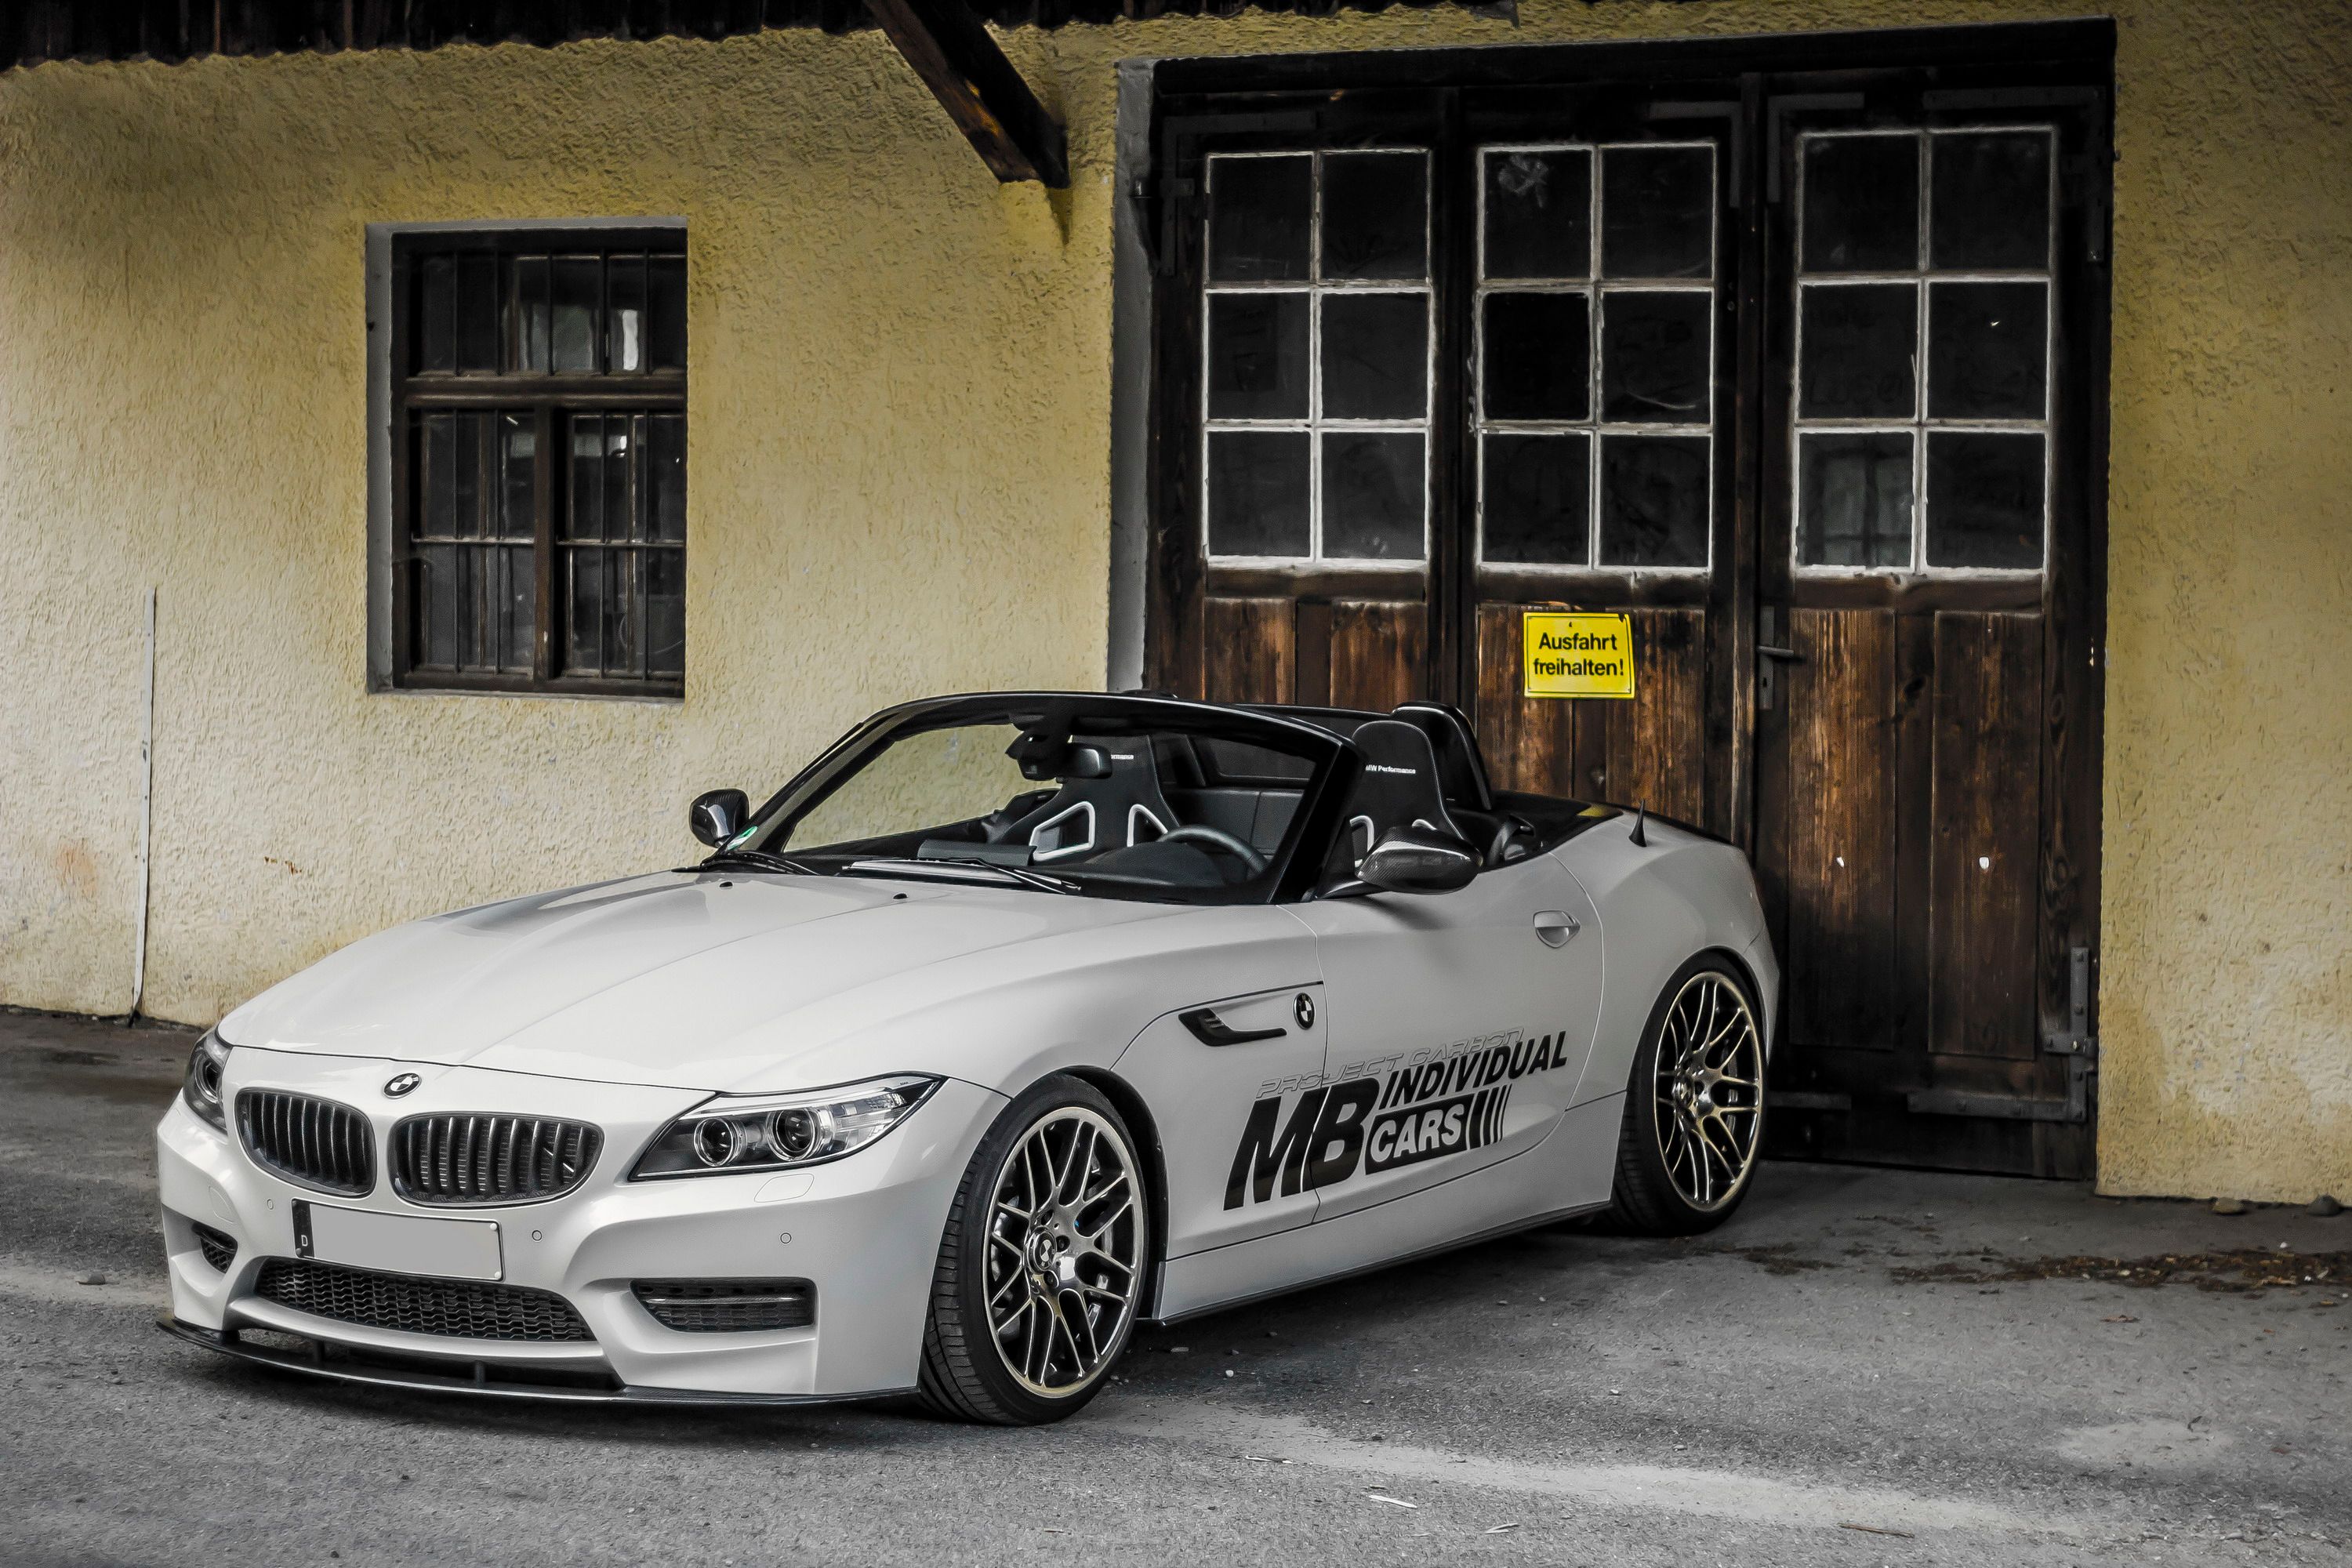 2014 BMW Z4 By MB Individual Cars